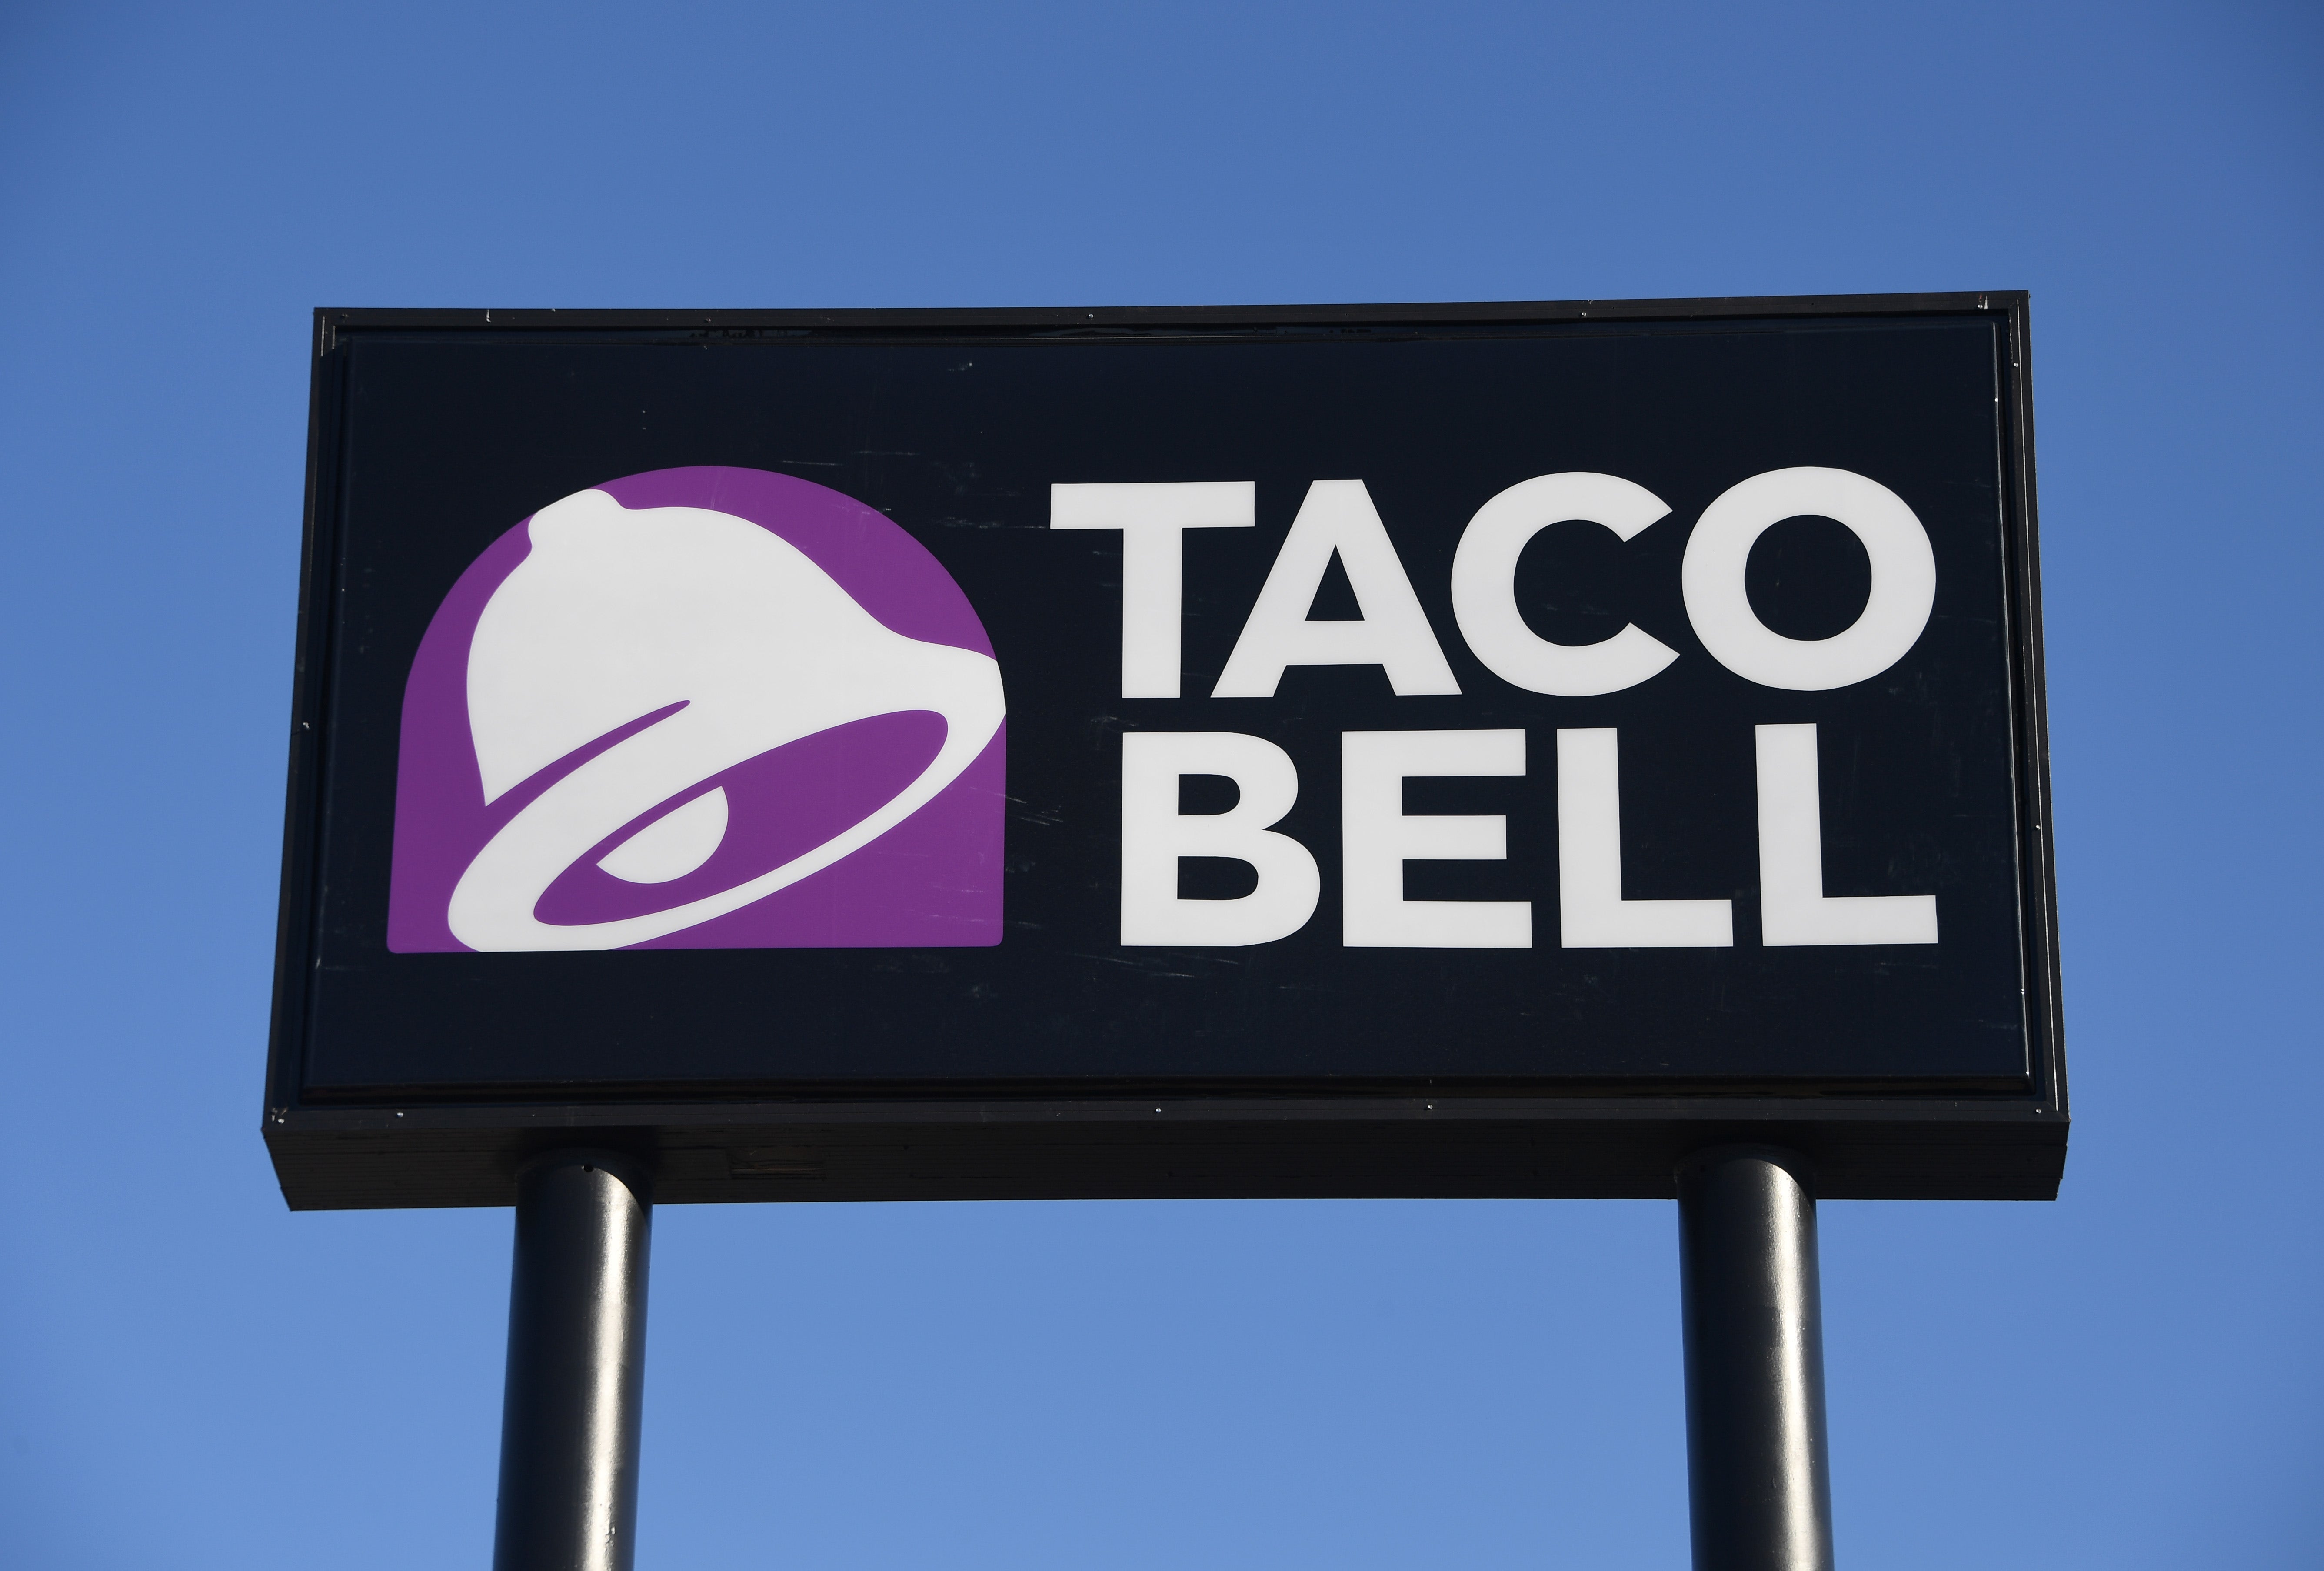 Maryland corrections officers accused of driving into Taco Bell following feud with employees